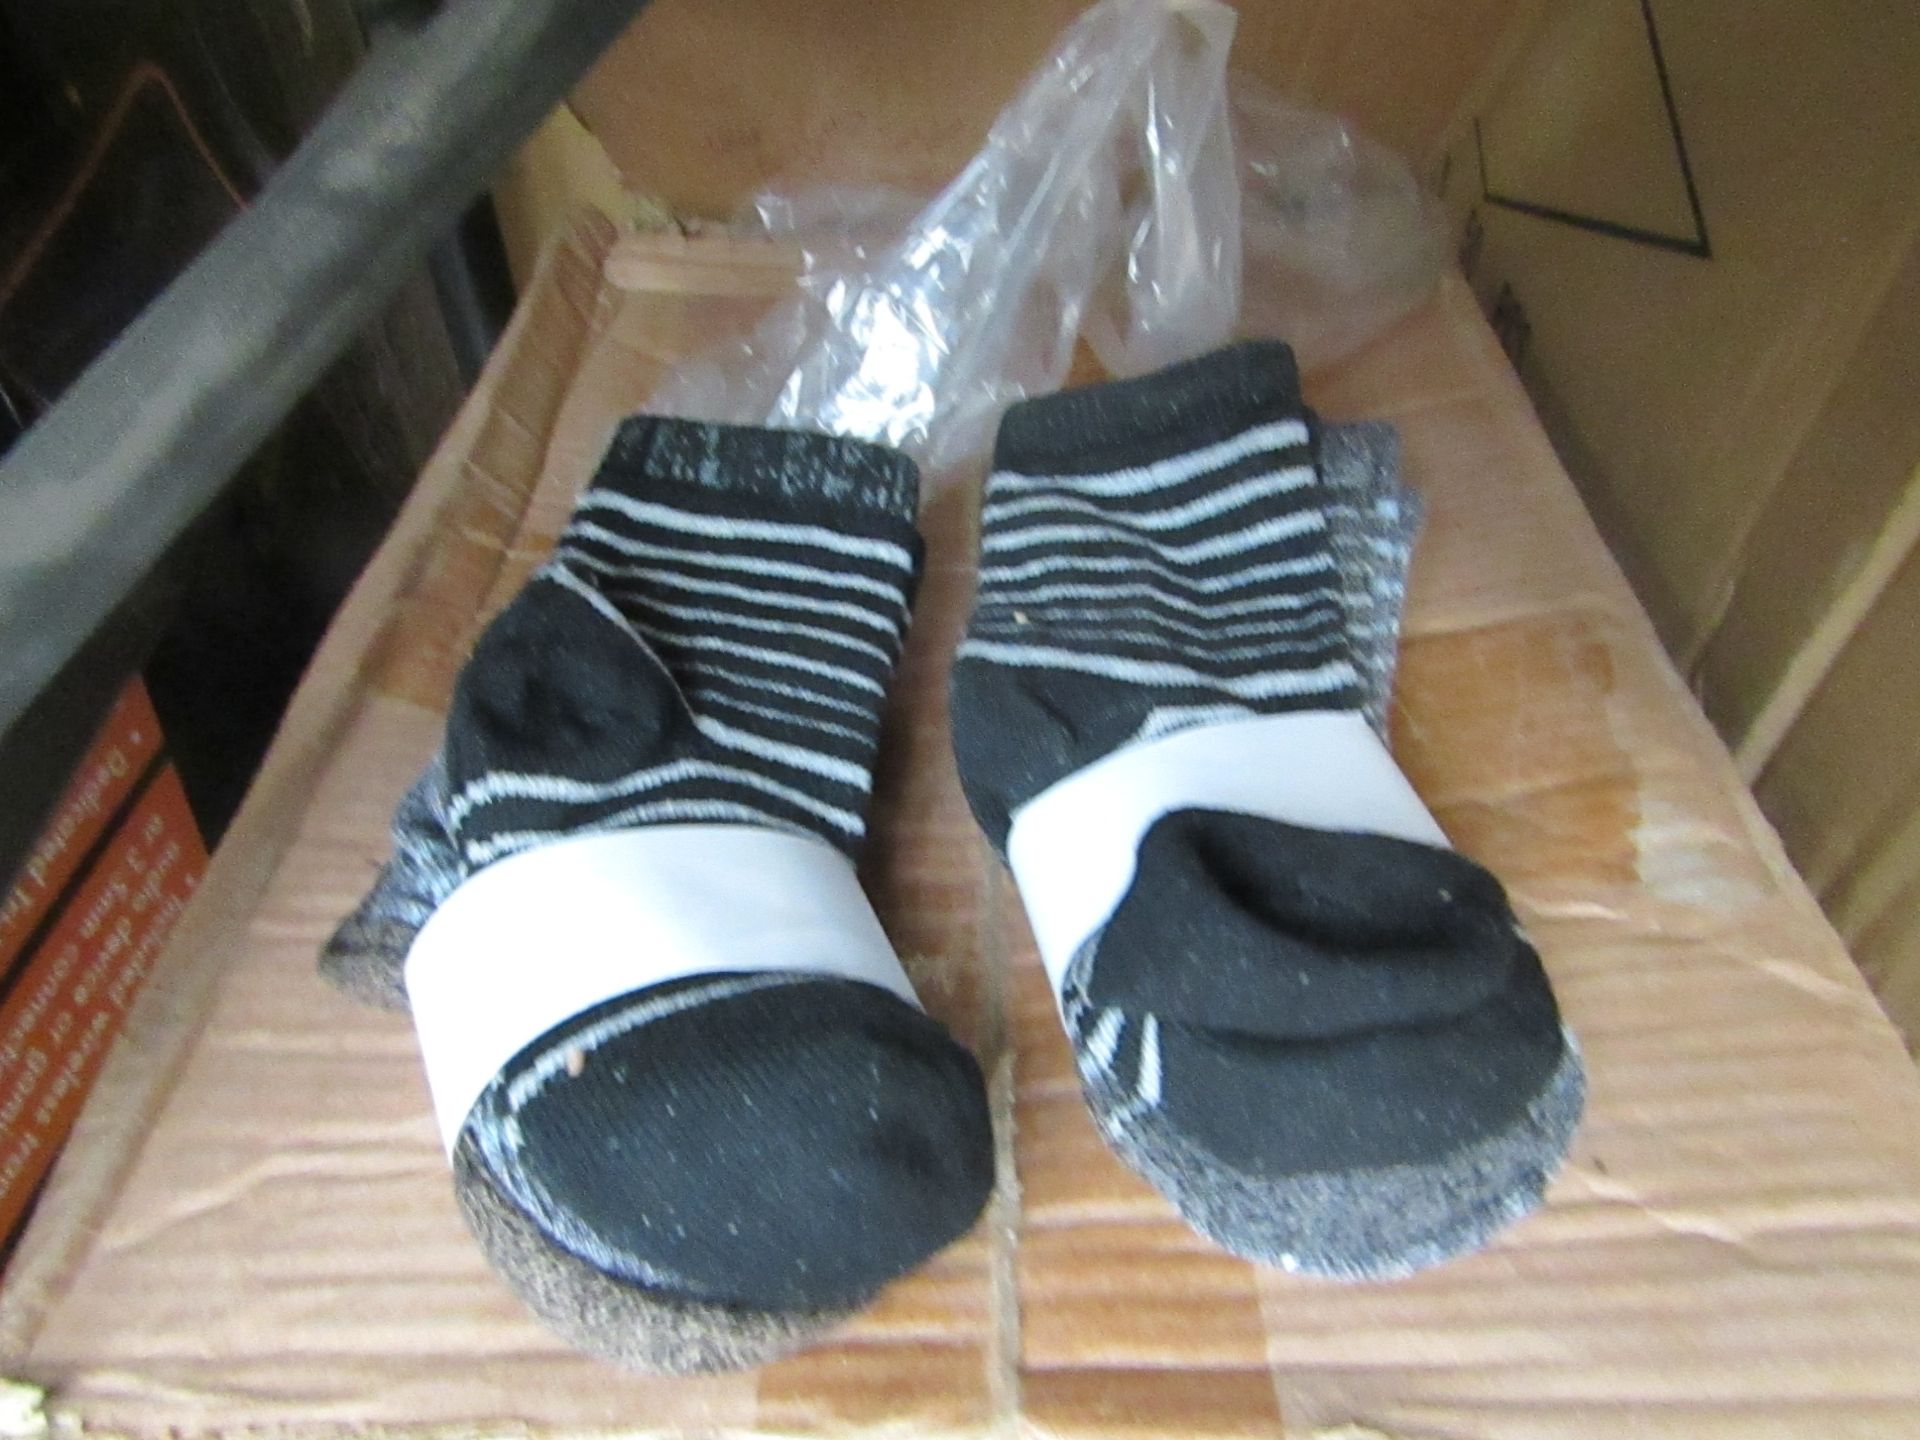 6x Pairs of 3 Childrens Socks - See the Image For Design.